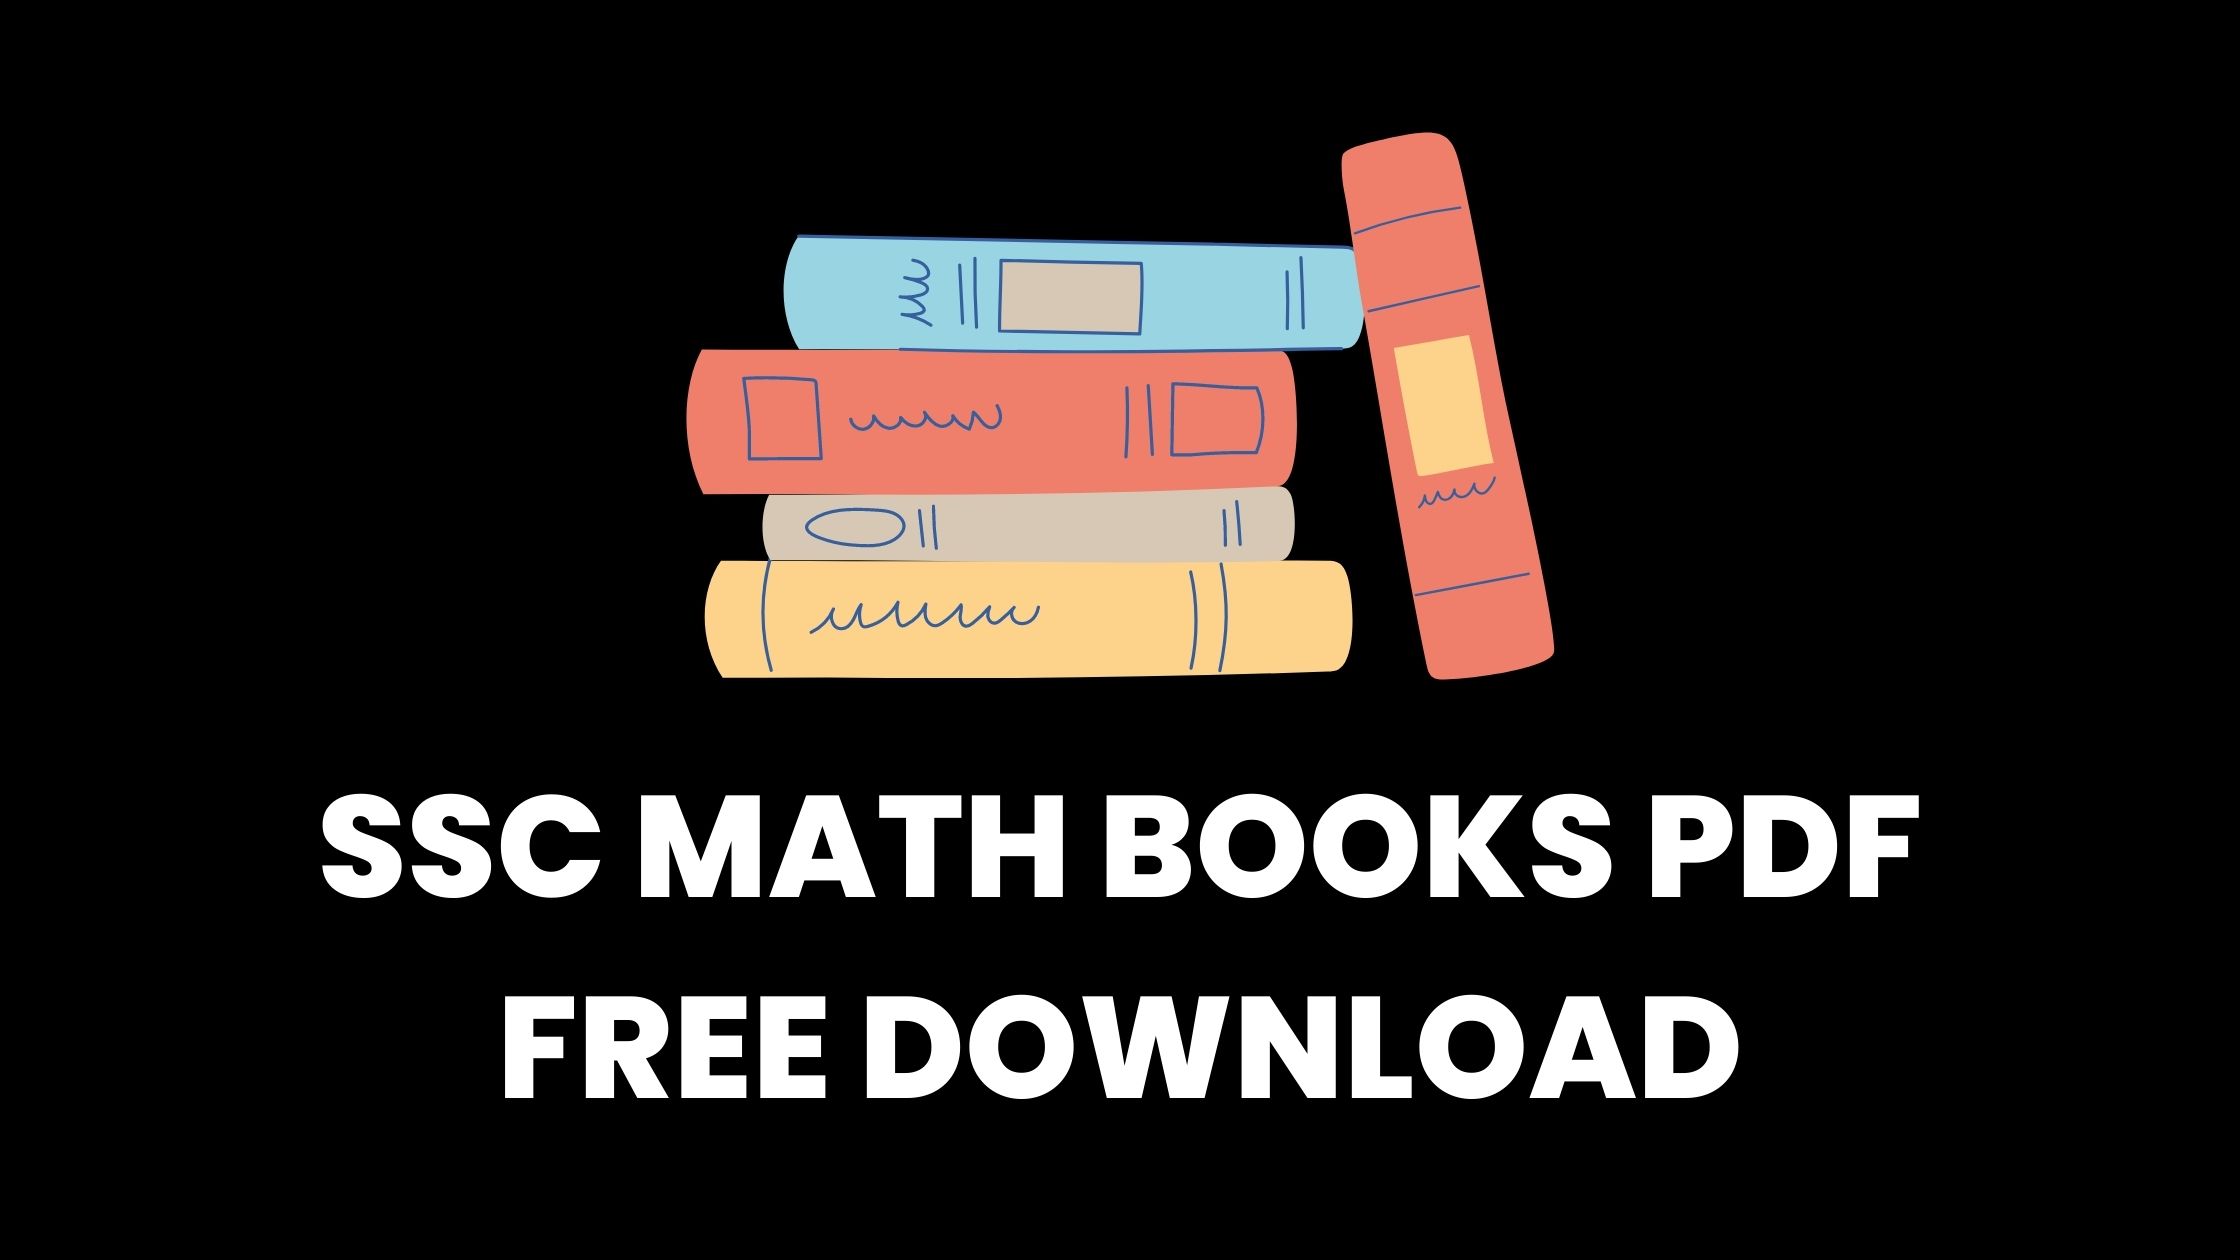 SSC maths books pdf free download in Hindi and English.